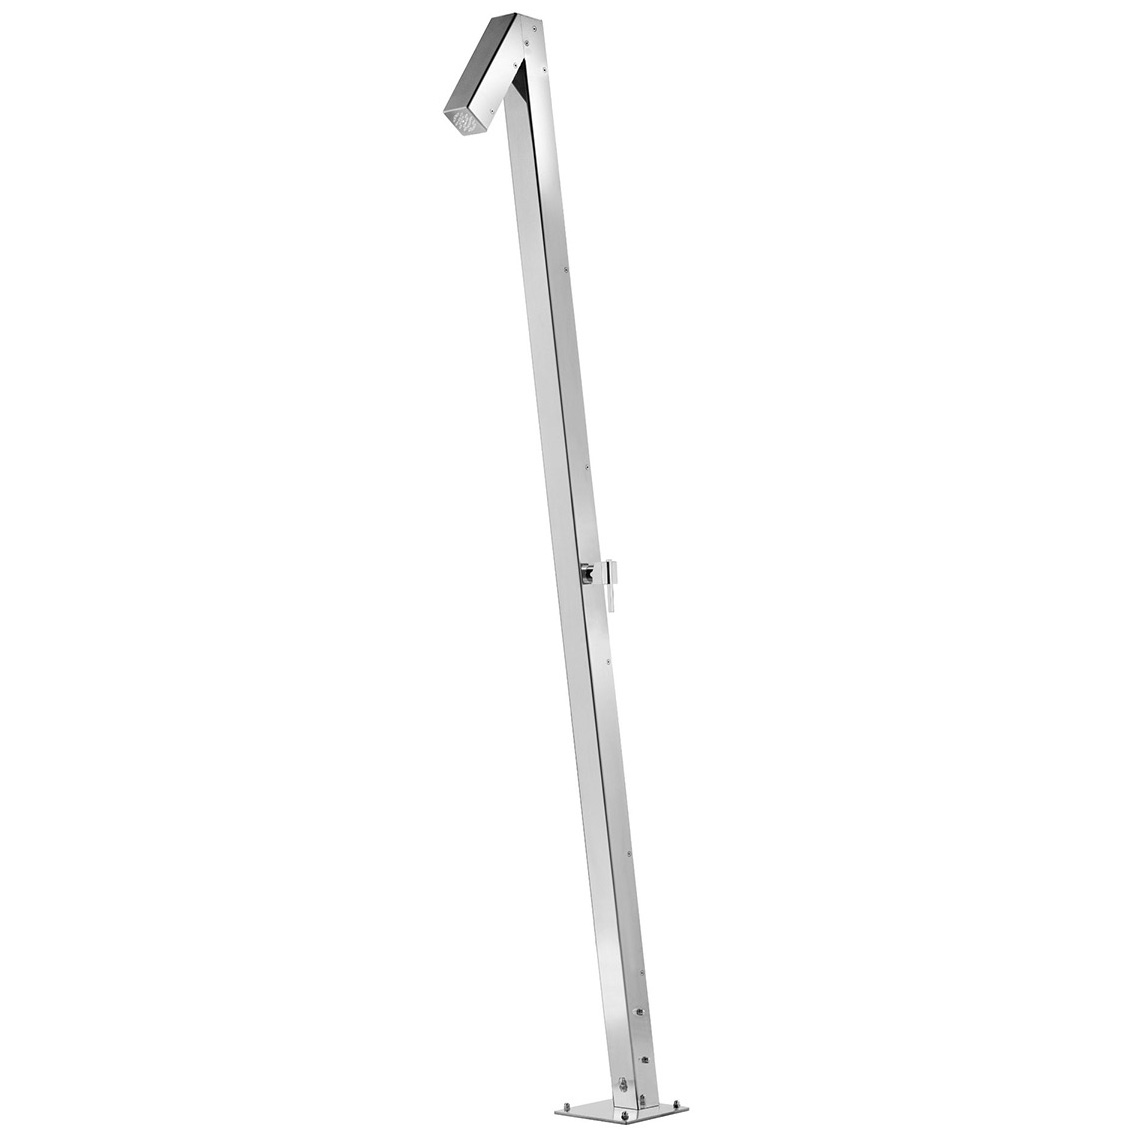 Zenit Q70 316 Marine Grade Stainless Steel Free Standing Hot and Cold Shower Column